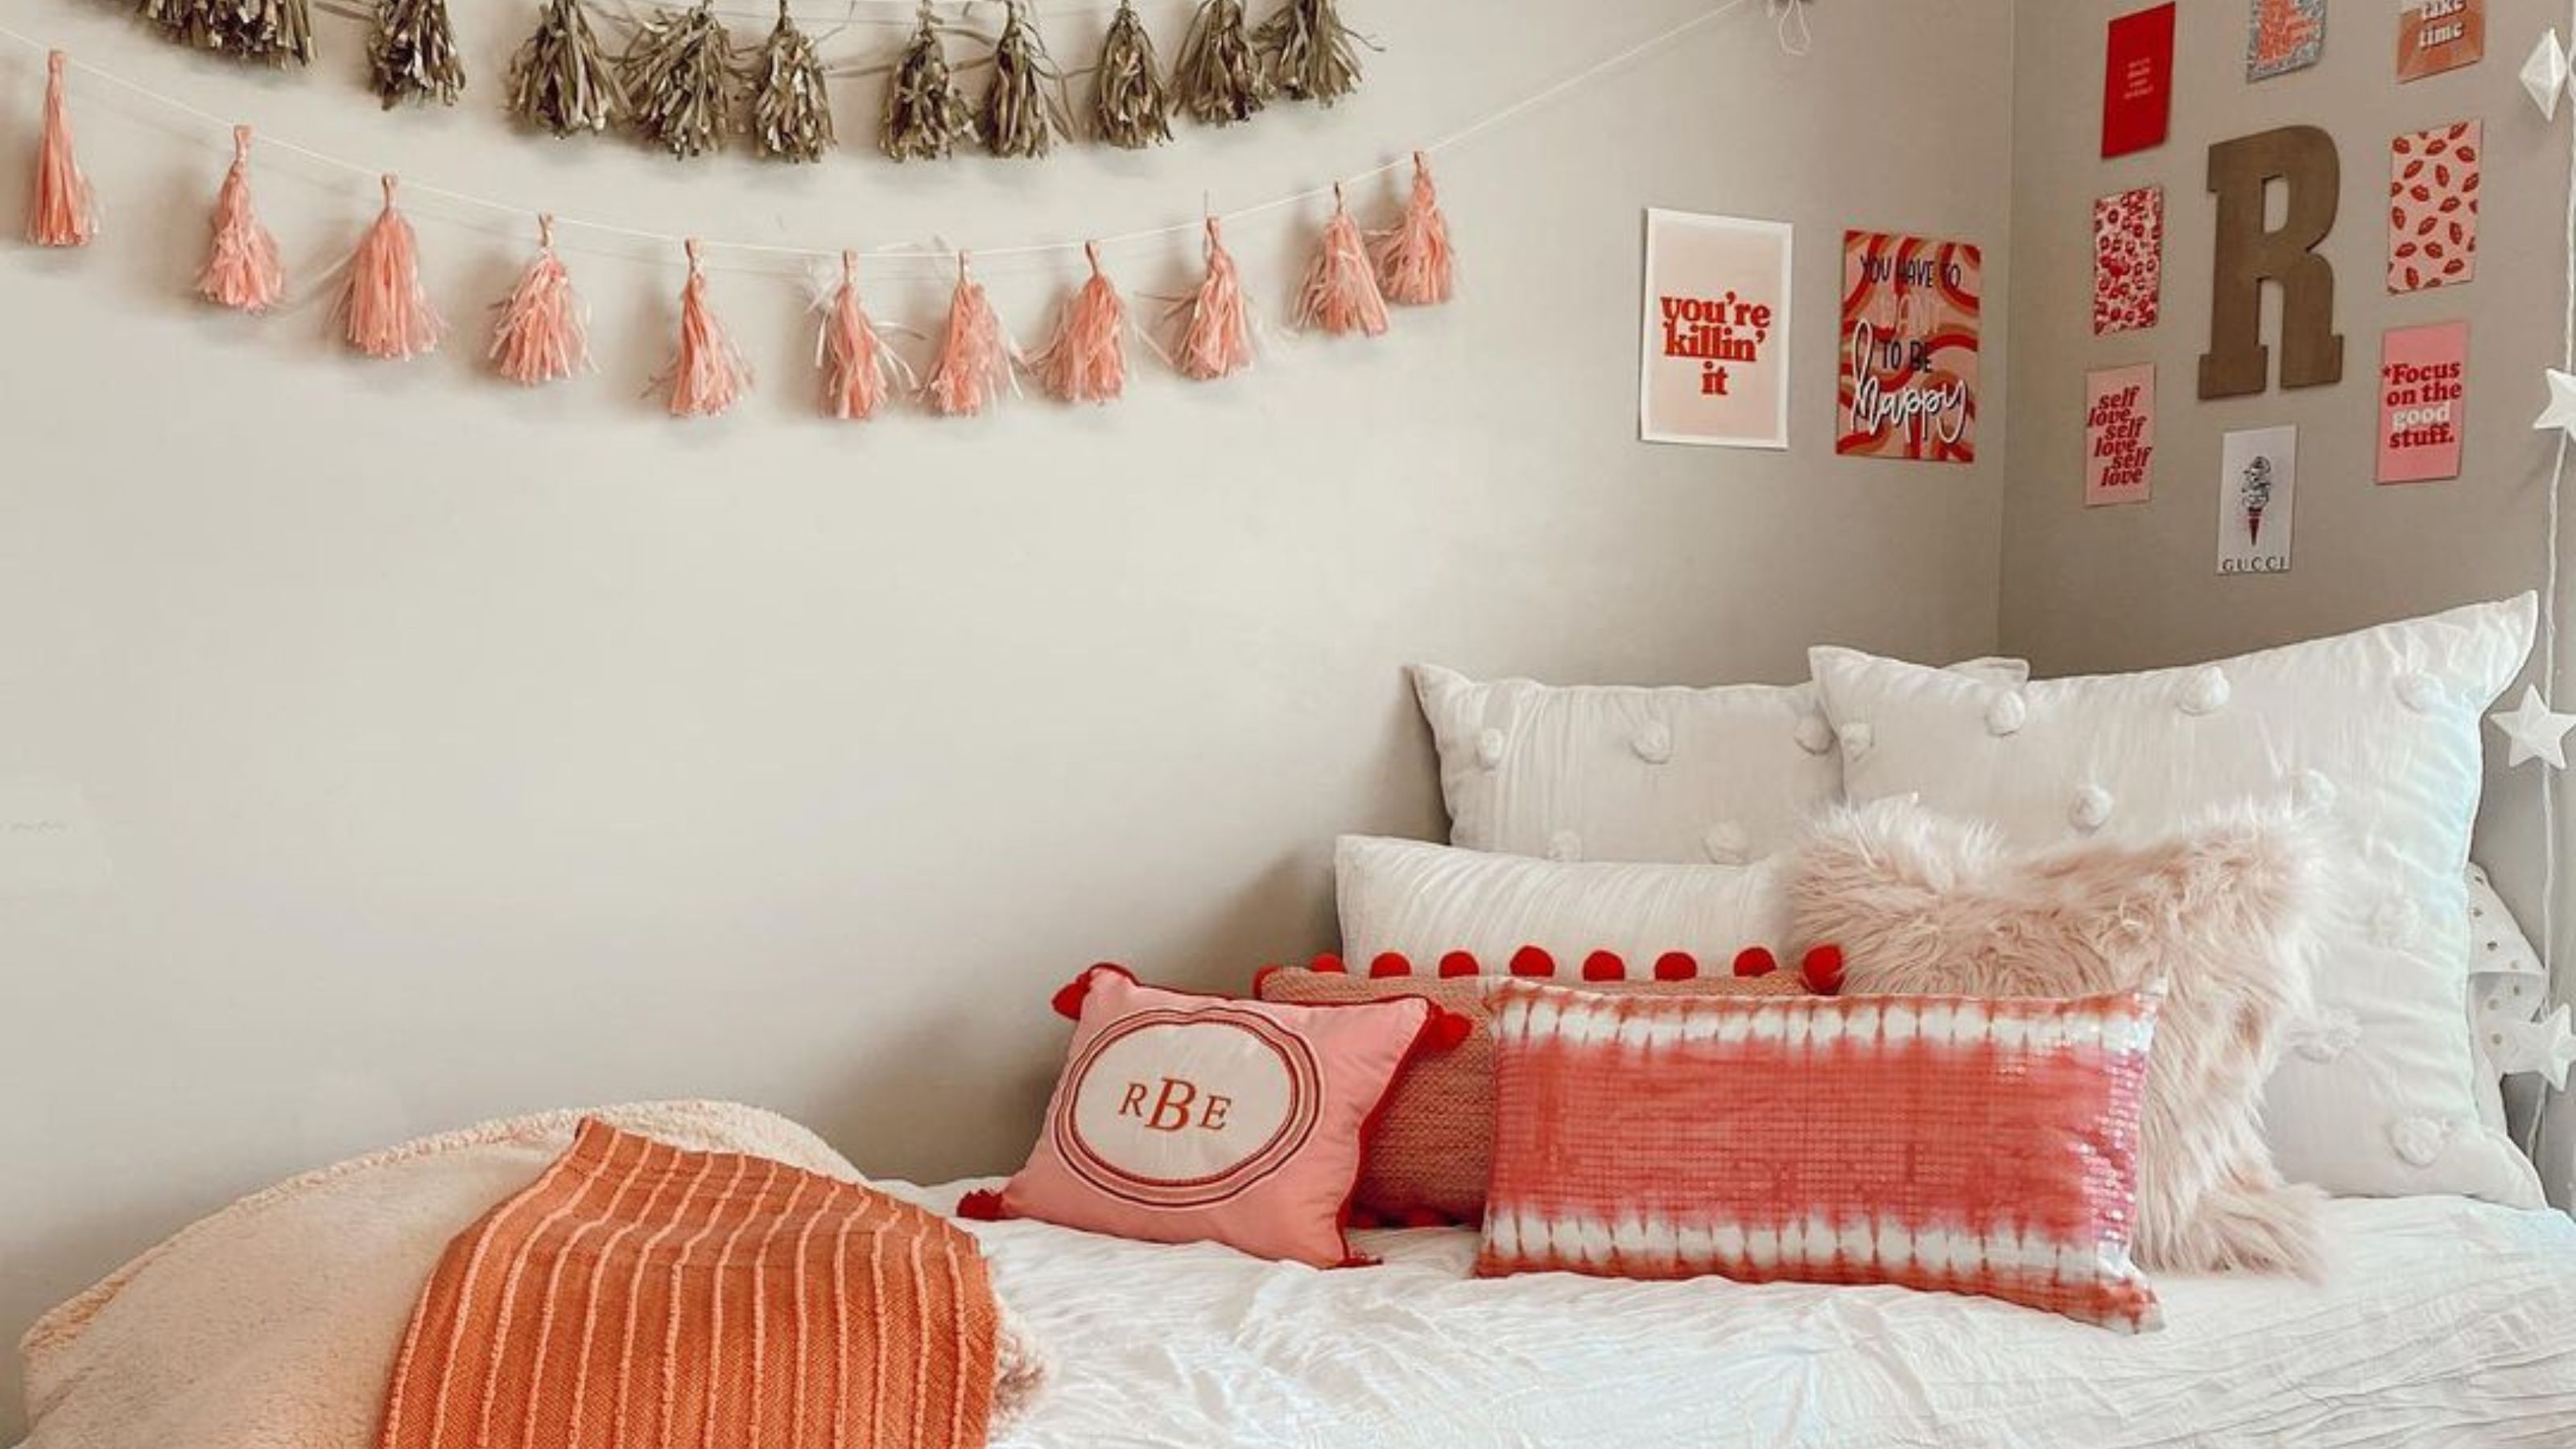 10 Inspiring Aesthetic Room Ideas for a Dreamy and Personalized Space —  Lord Decor